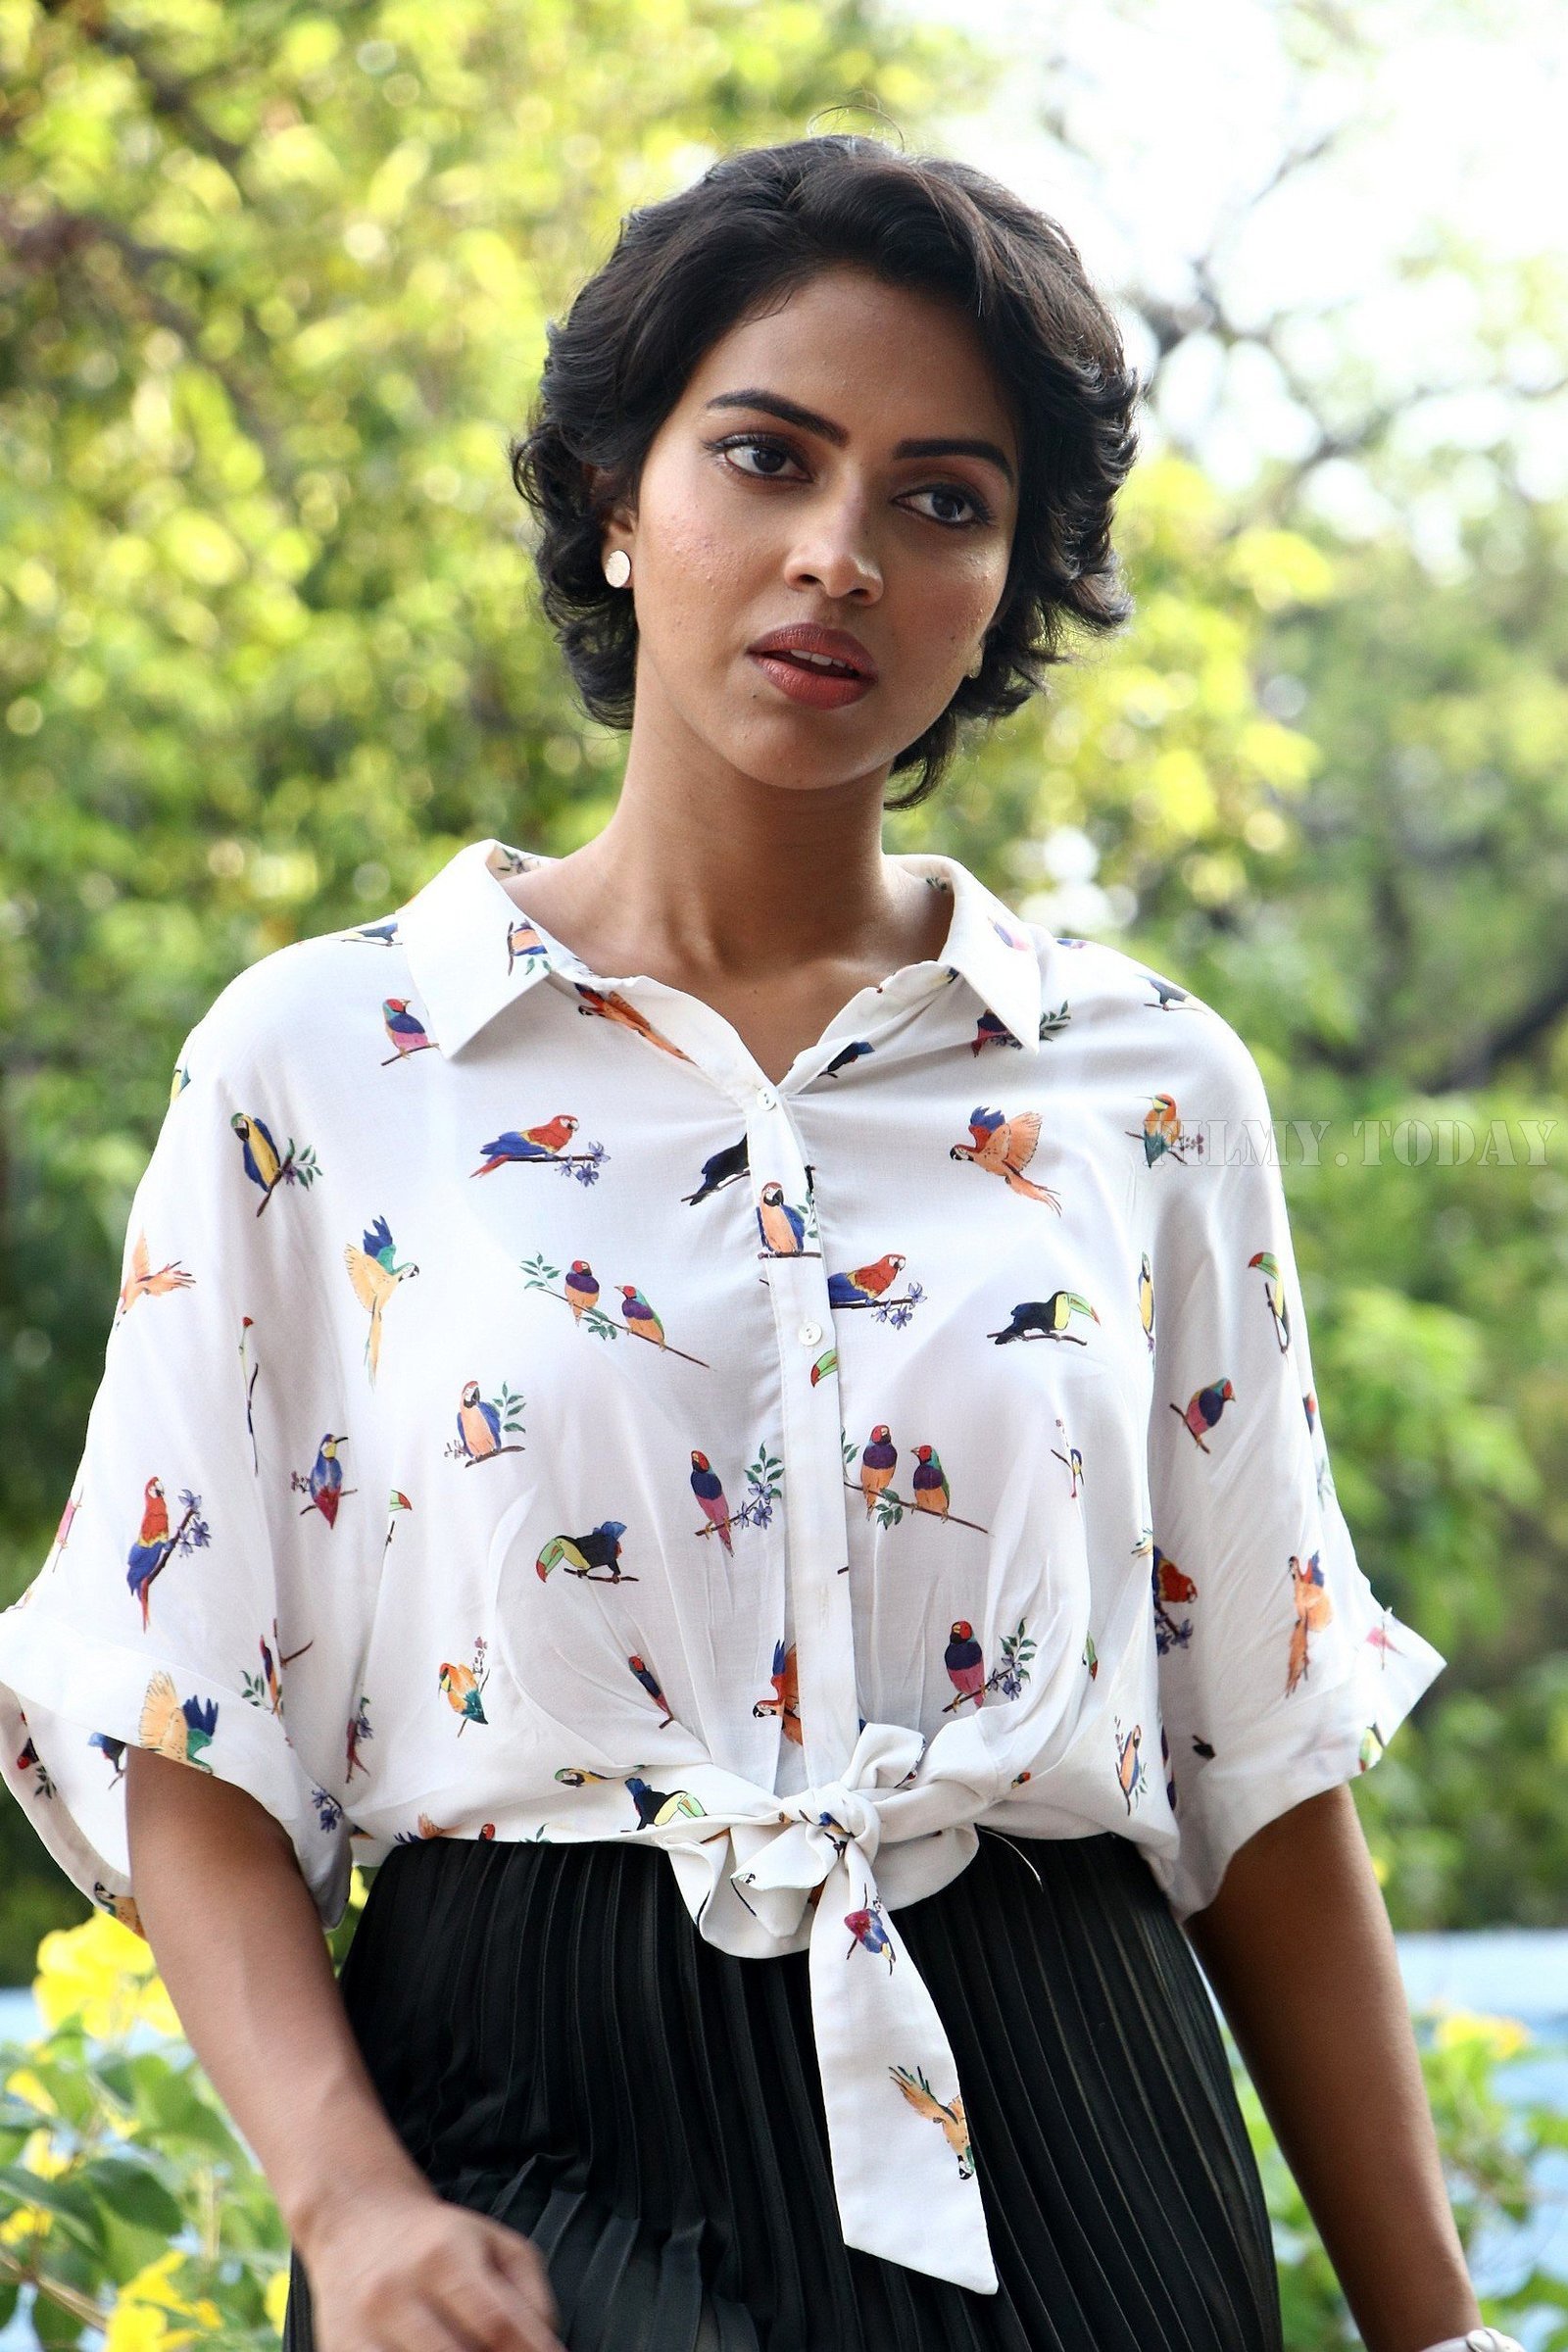 Amala Paul Photos At Aadai Movie Promotions | Picture 1664797